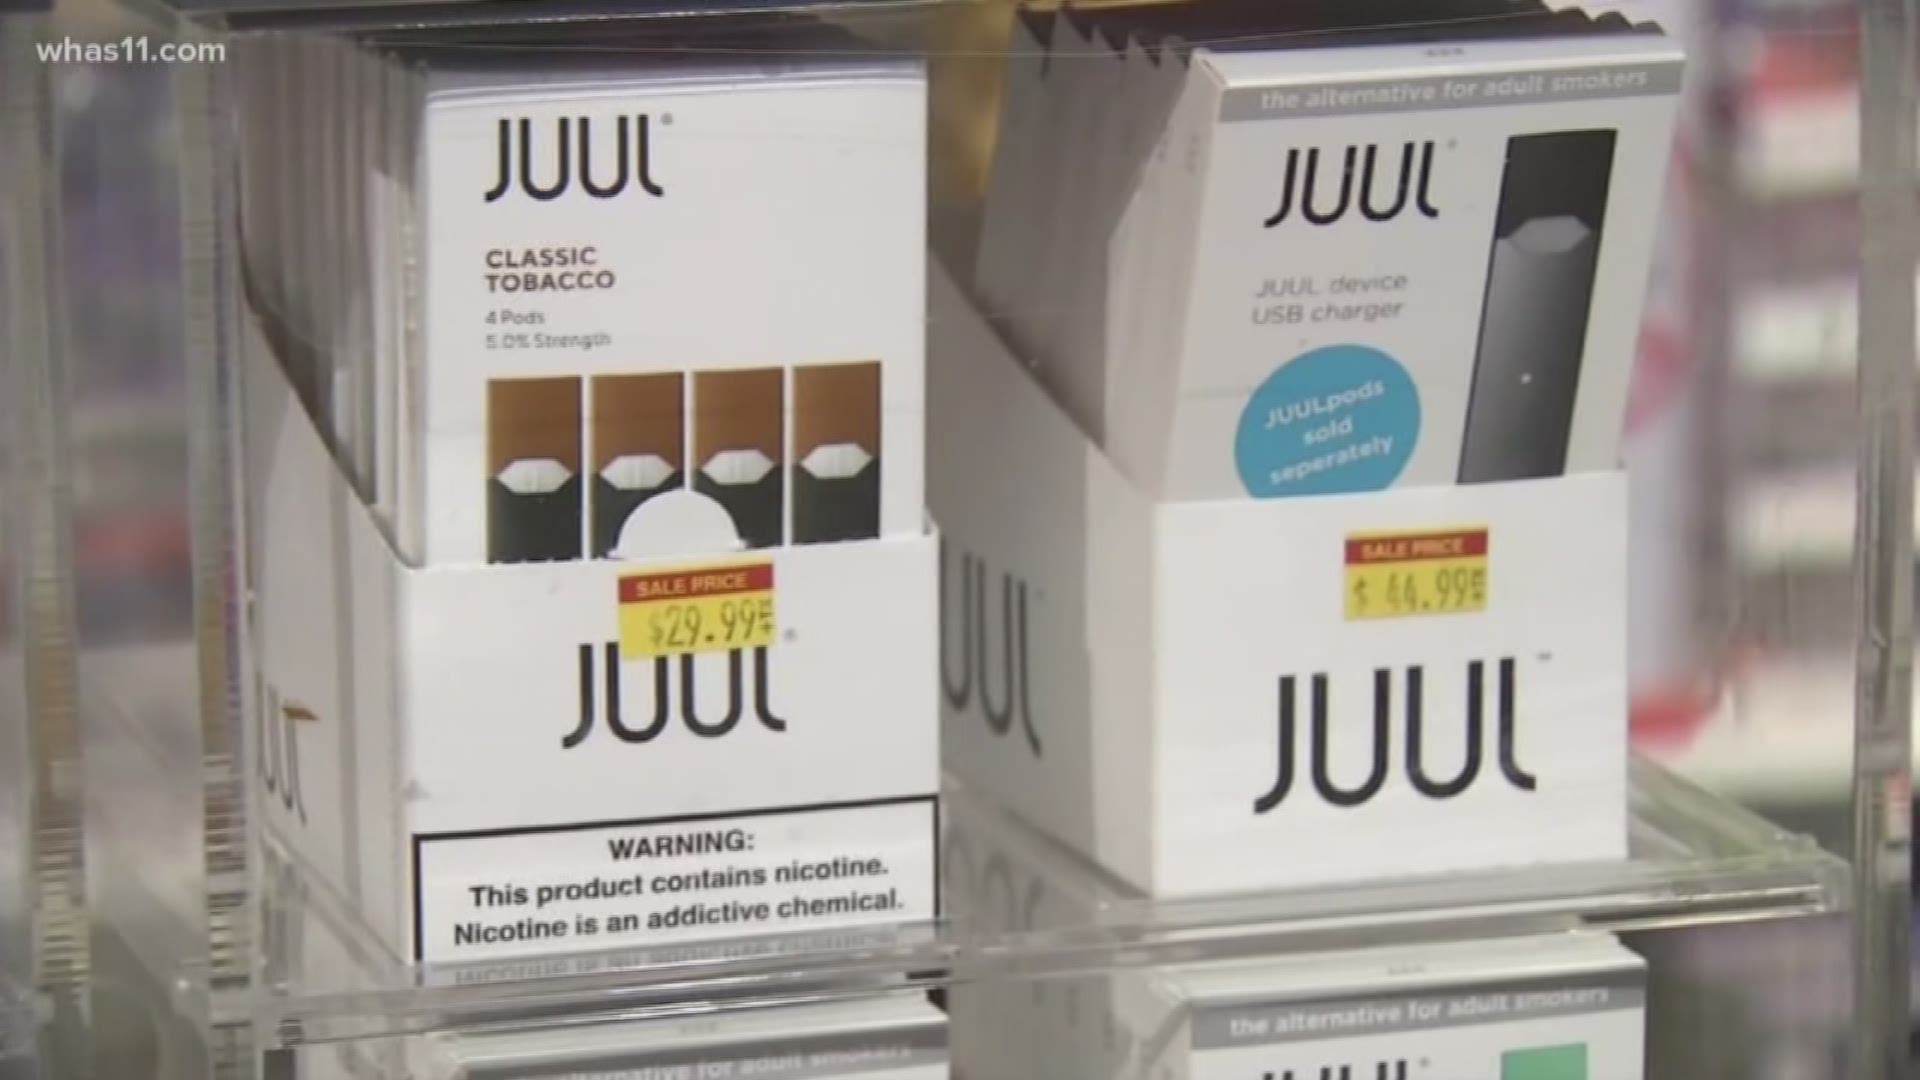 A federal court granted JUUL Labs' request to temporarily block the FDA's order which would have stopped the product's sale in the U.S.